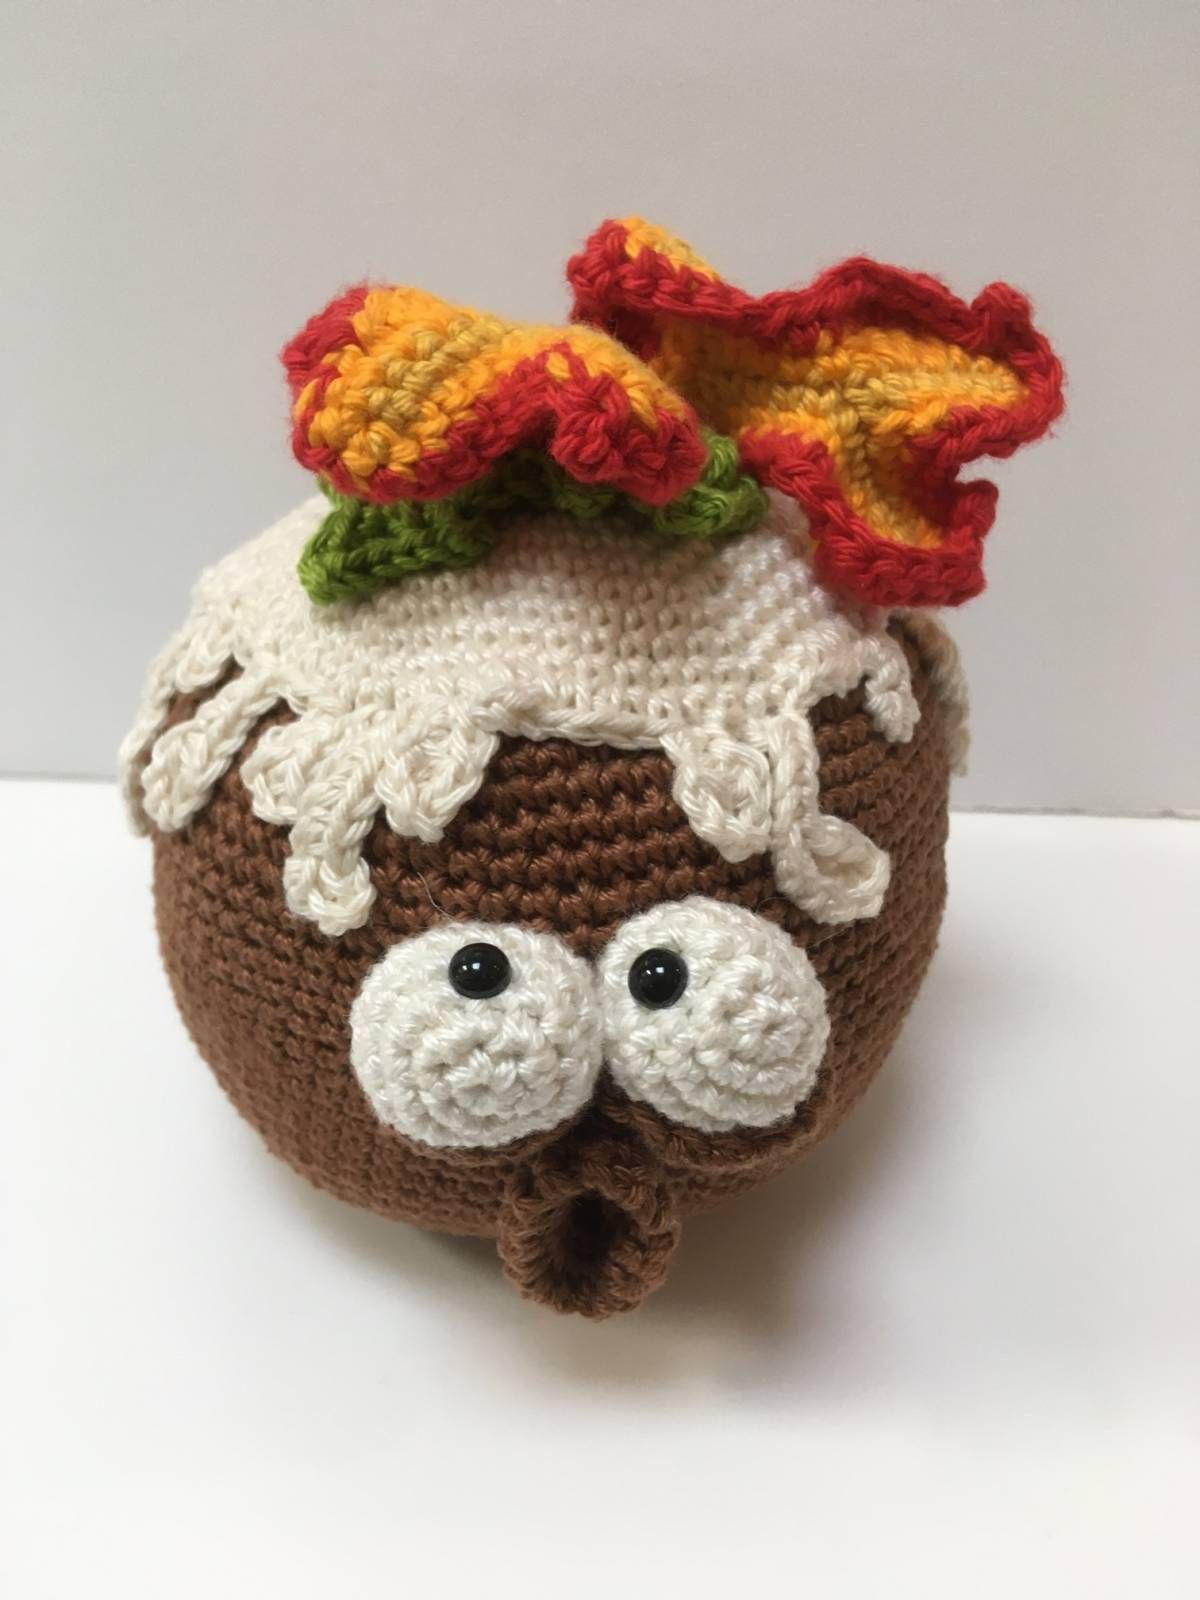 Crochet Christmas Pudding Amigurumi Pattern Review by Jen for Cottontail and Whiskers